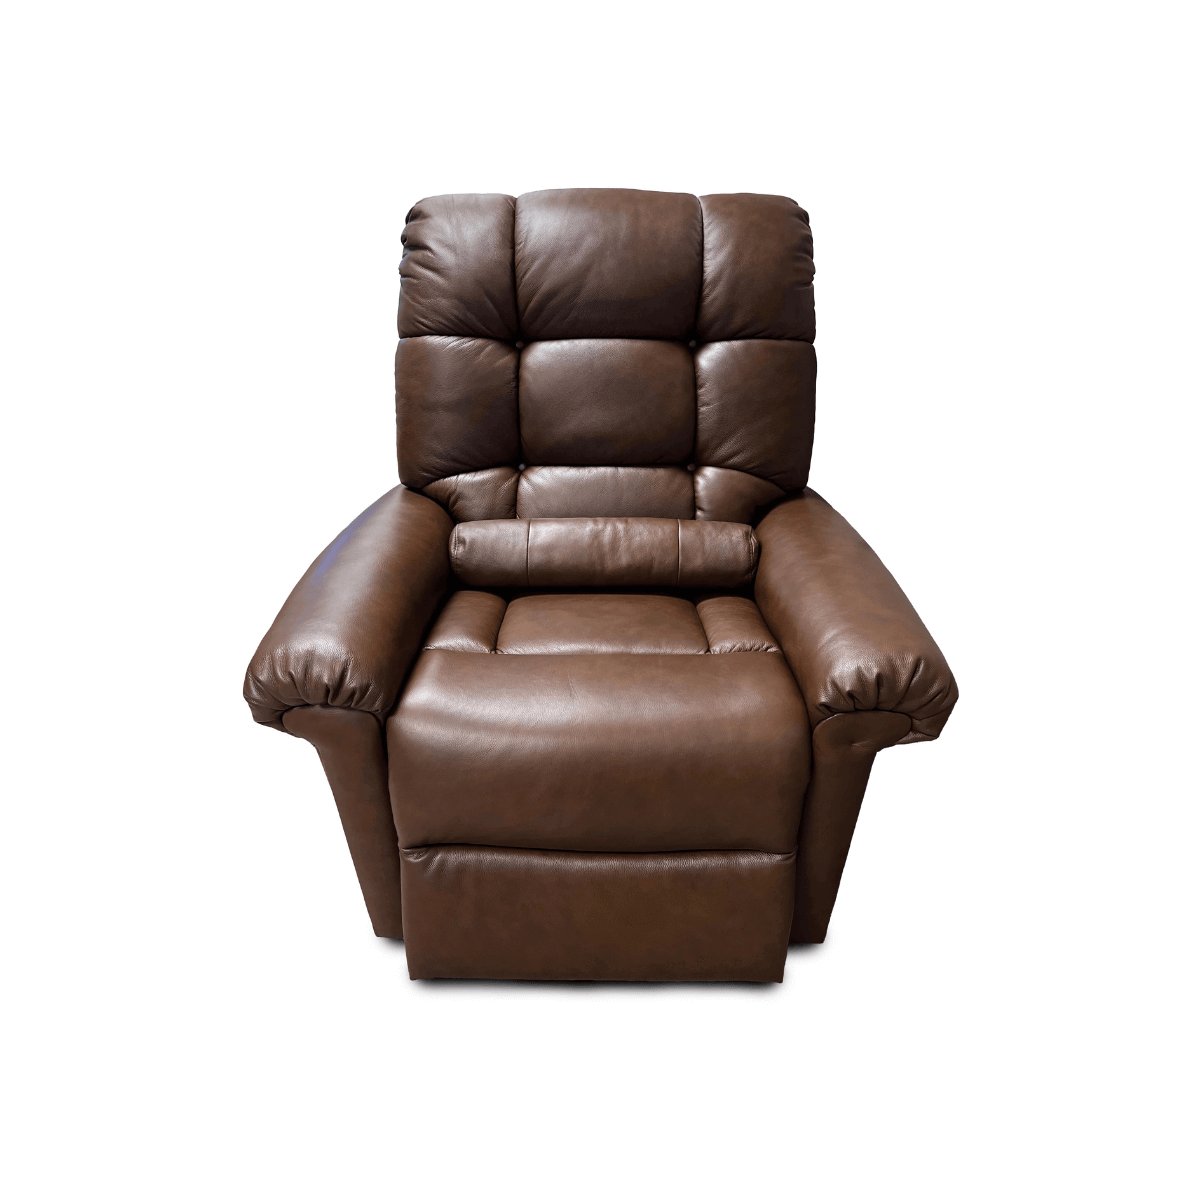 Brown Journey Perfect Sleep Chair sitting upright with extended footrest down and bolster pillow for lower back area